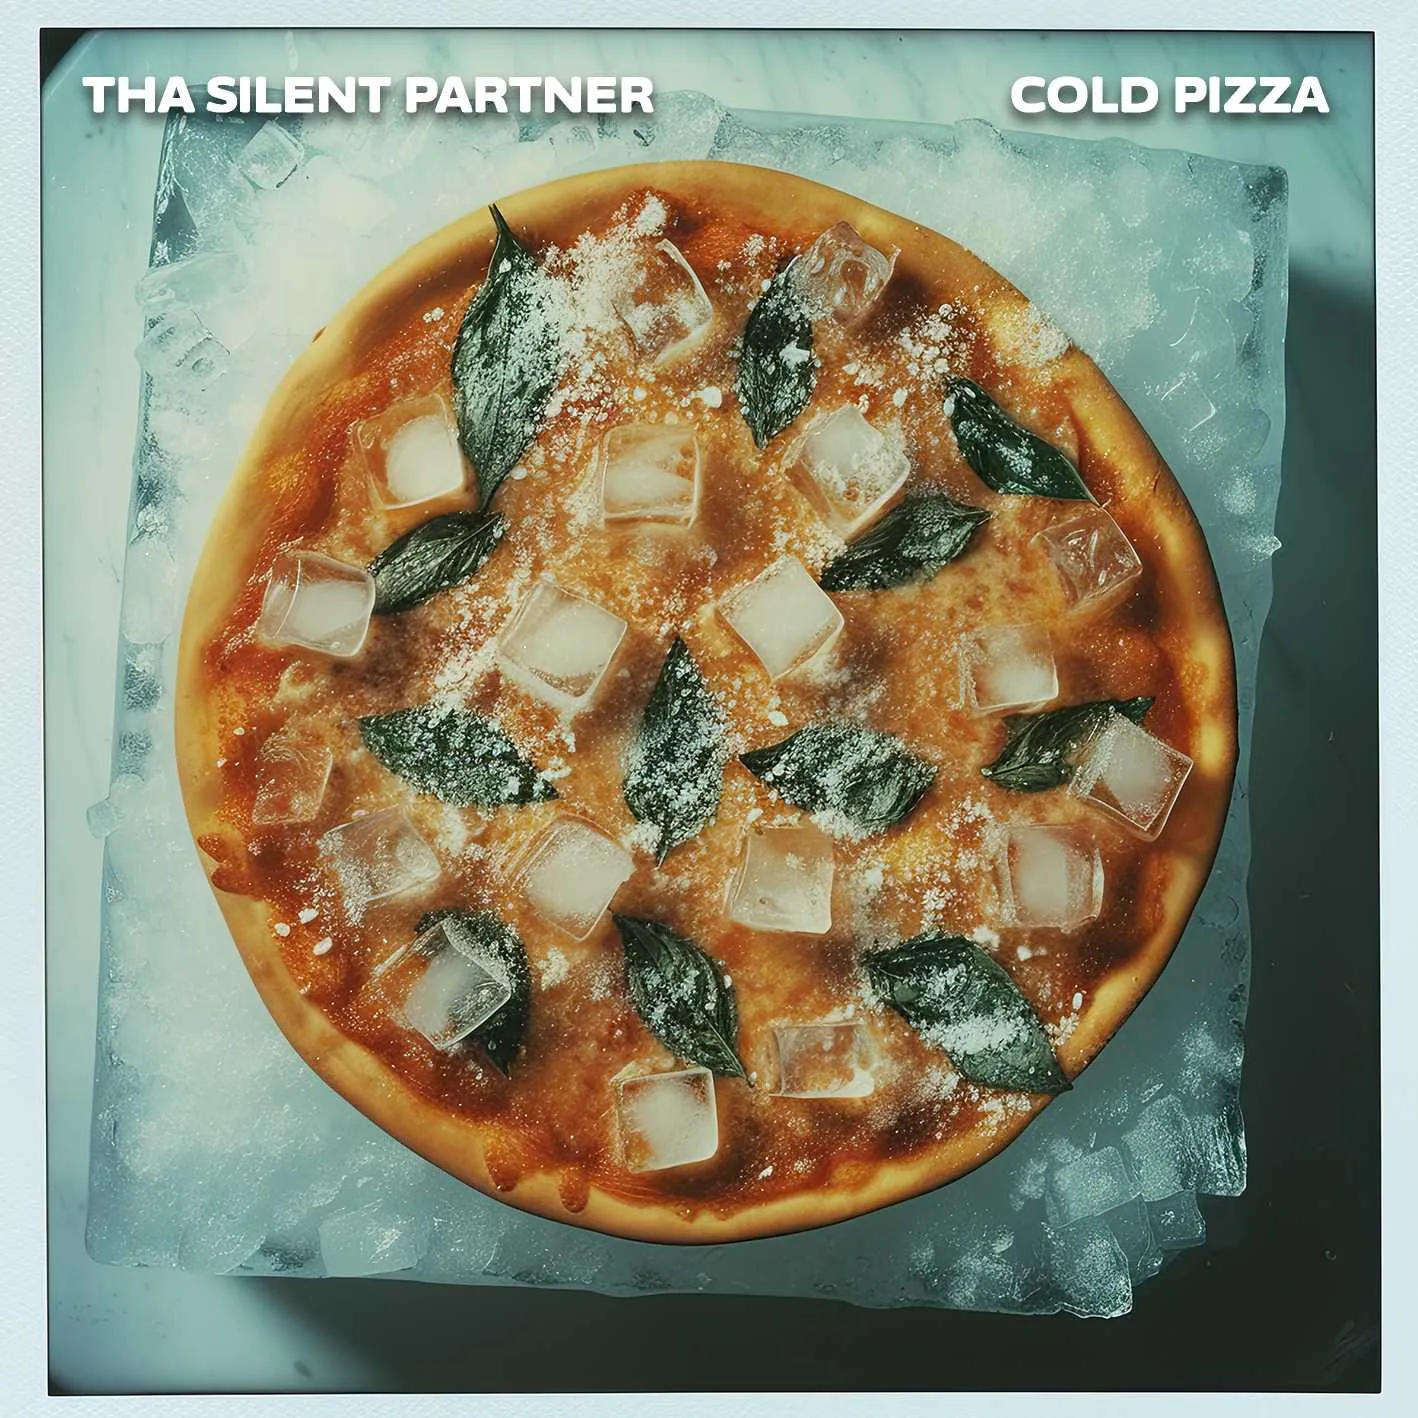 Album cover for “Cold Pizza” by Tha Silent Partner